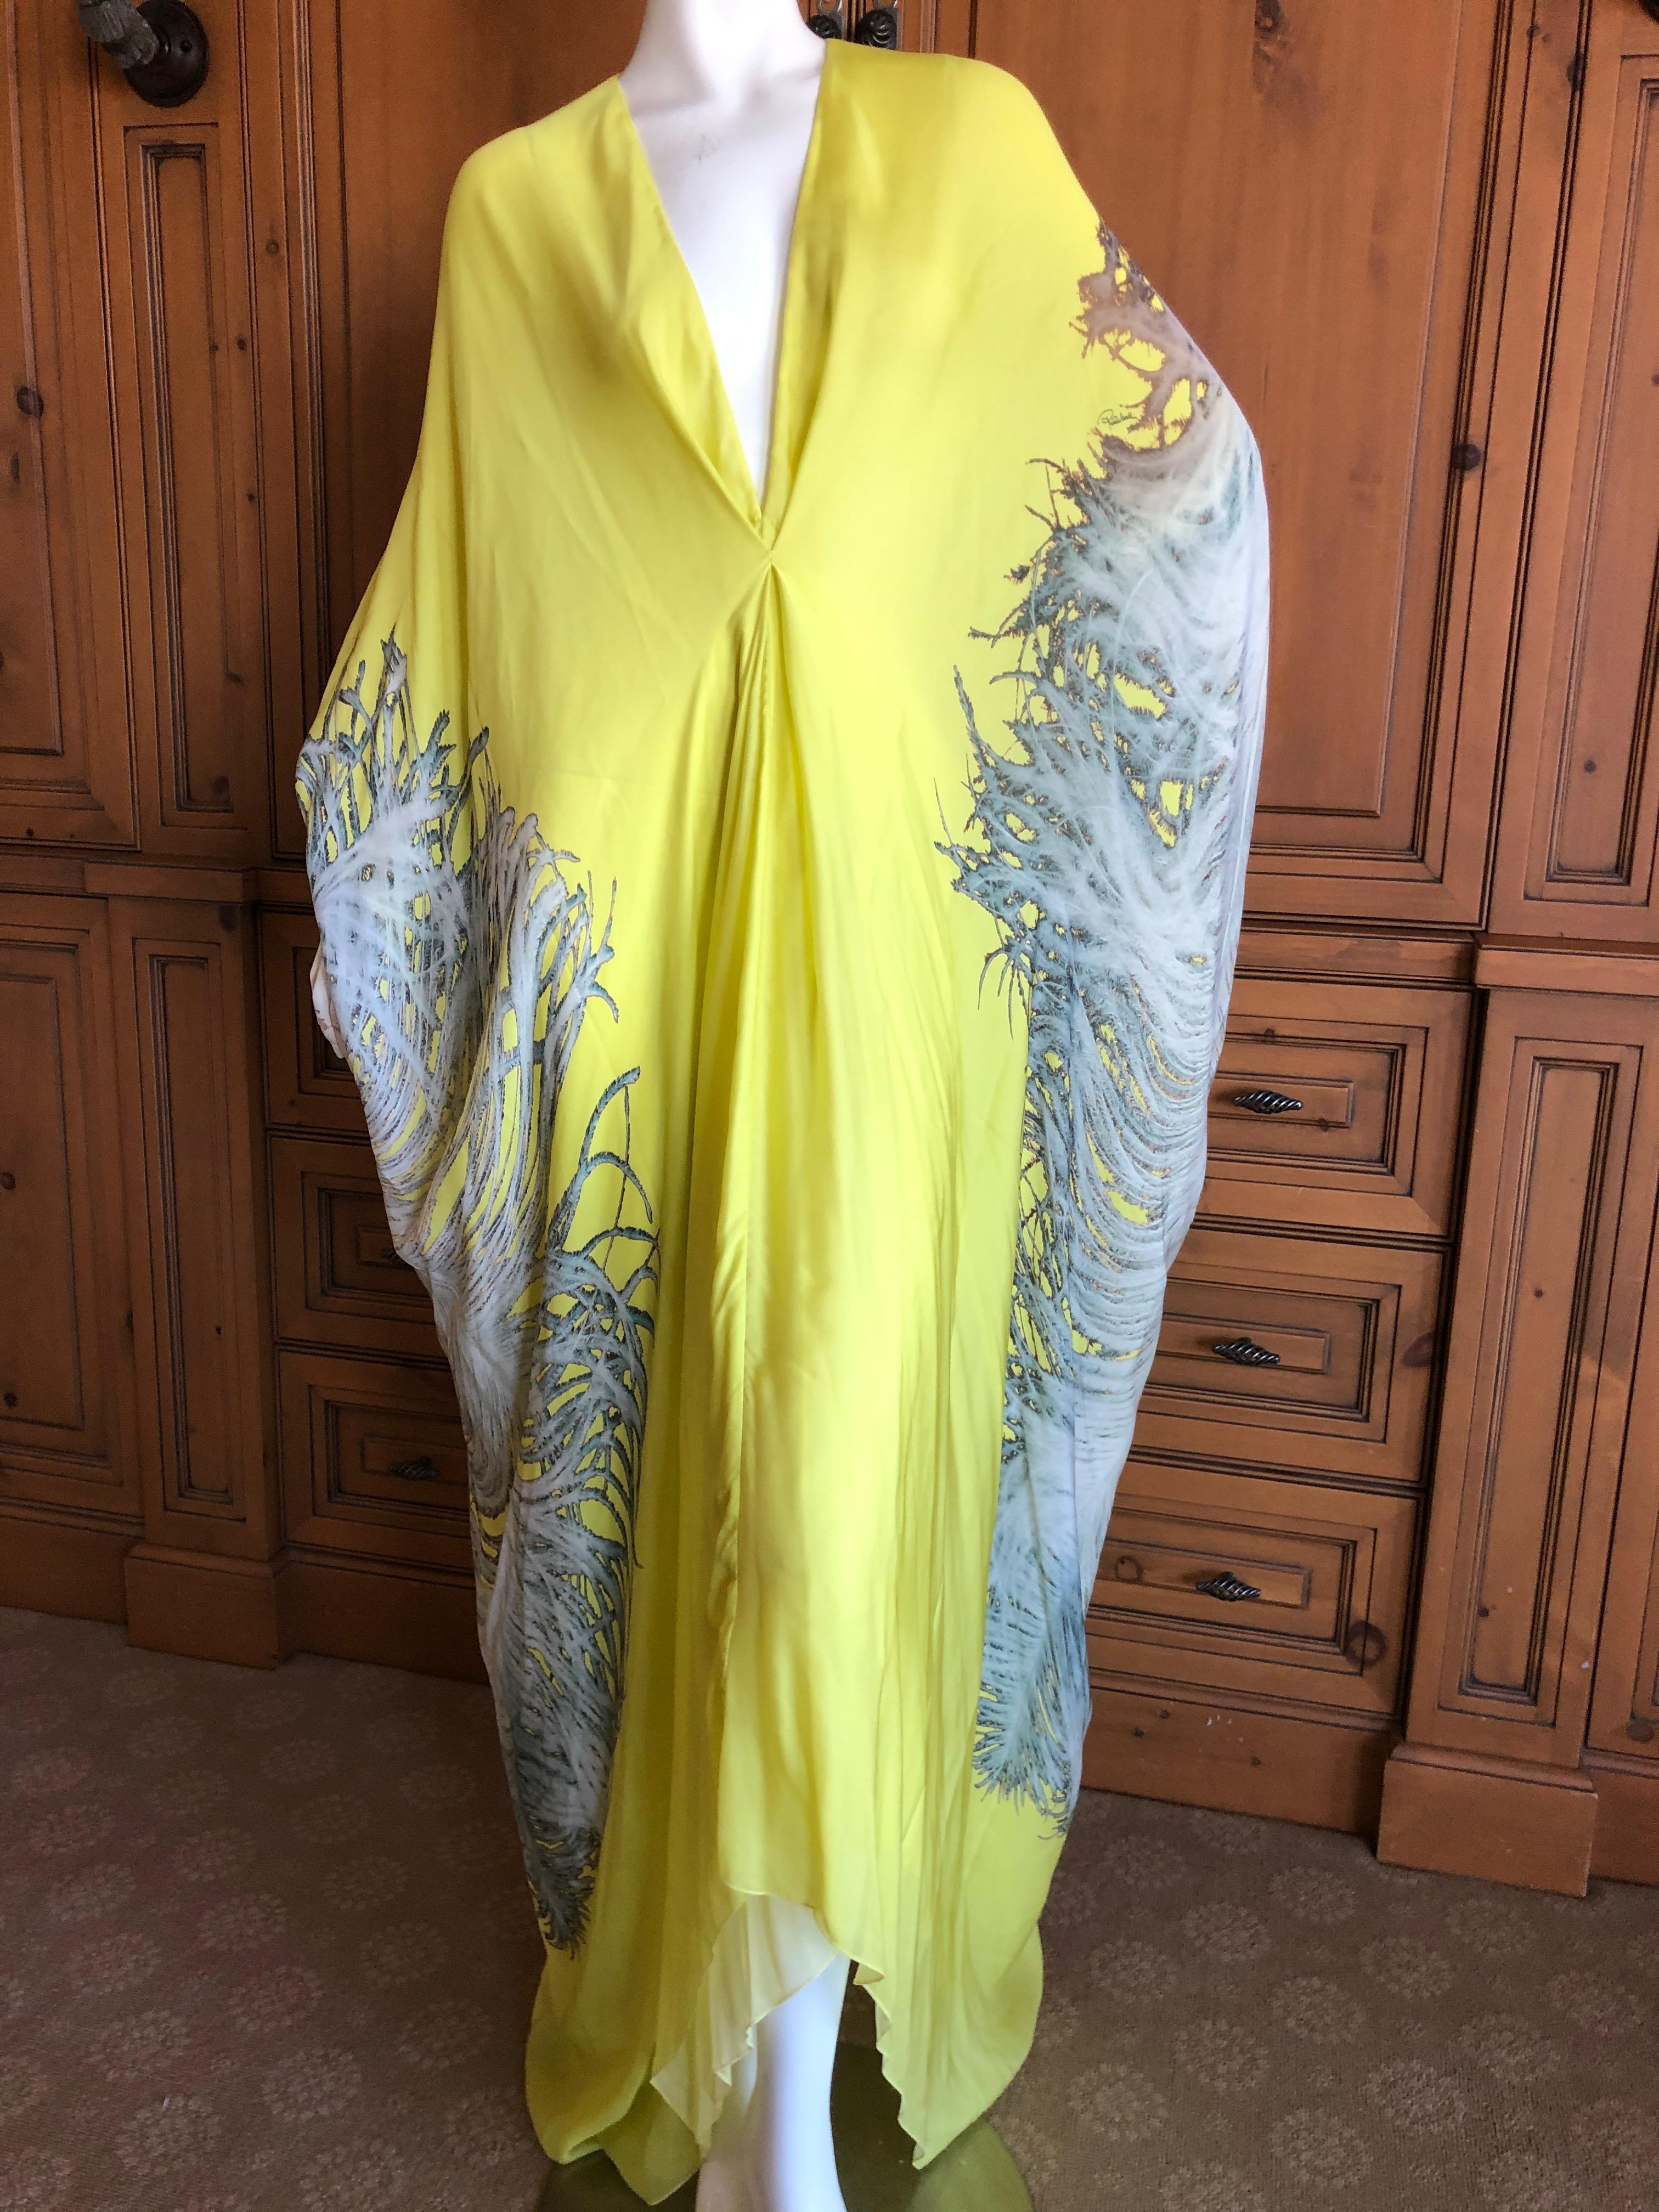 Roberto Cavalli Feather Print Yellow Silk Caftan Dress 
New with Tags
Thiis is long in the back, shorter in front.
One size fits most, very voluminous.
Size 40
 Bust 40